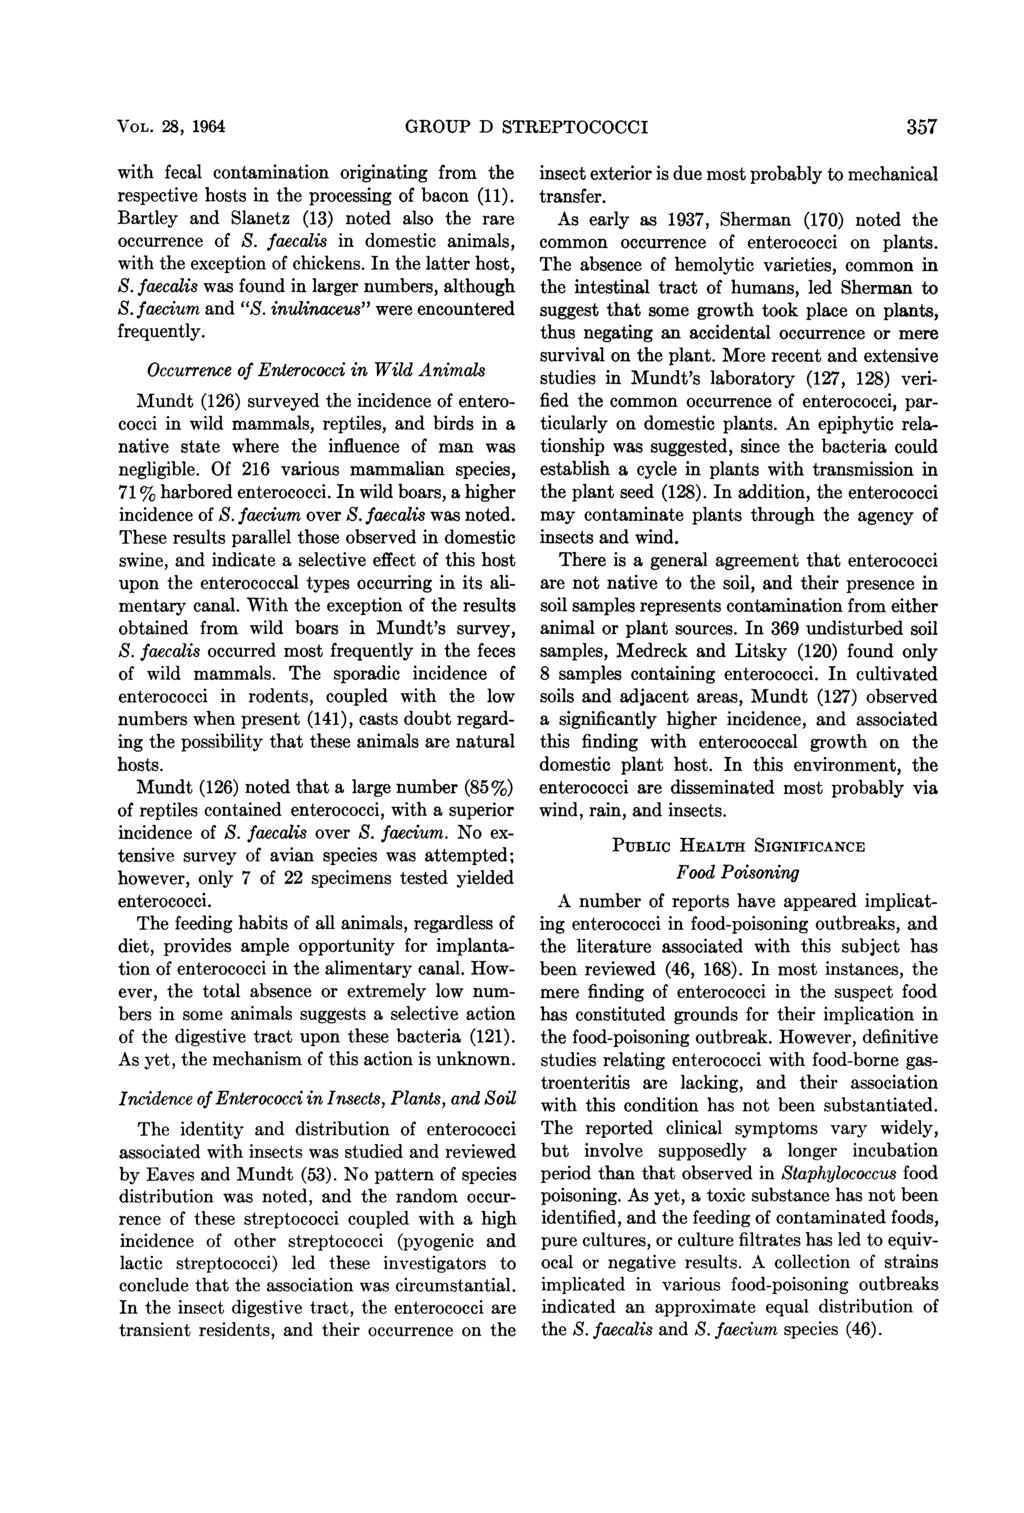 VOL. 28, 1964 with fecal contamination originating from the respective hosts in the processing of bacon (11). Bartley and Slanetz (13) noted also the rare occurrence of S.